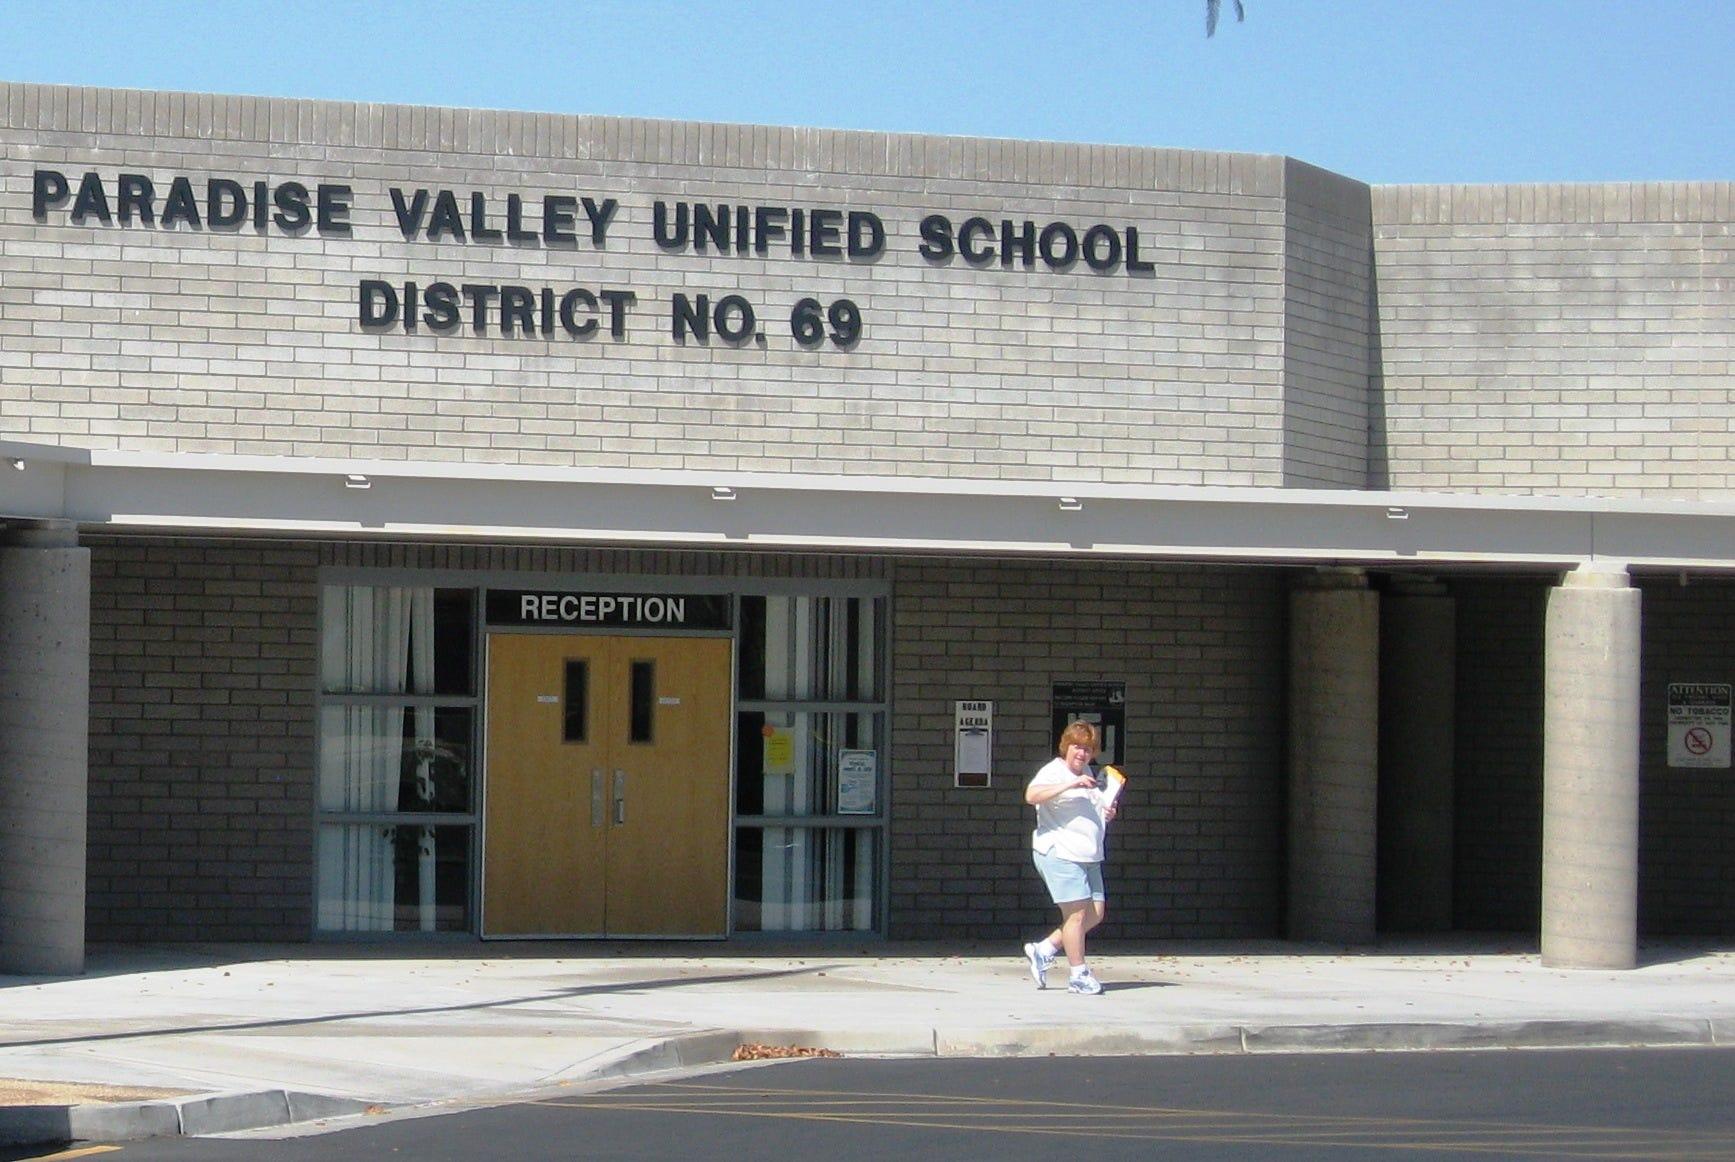 Paradise Valley Unified School District No. 69 building.